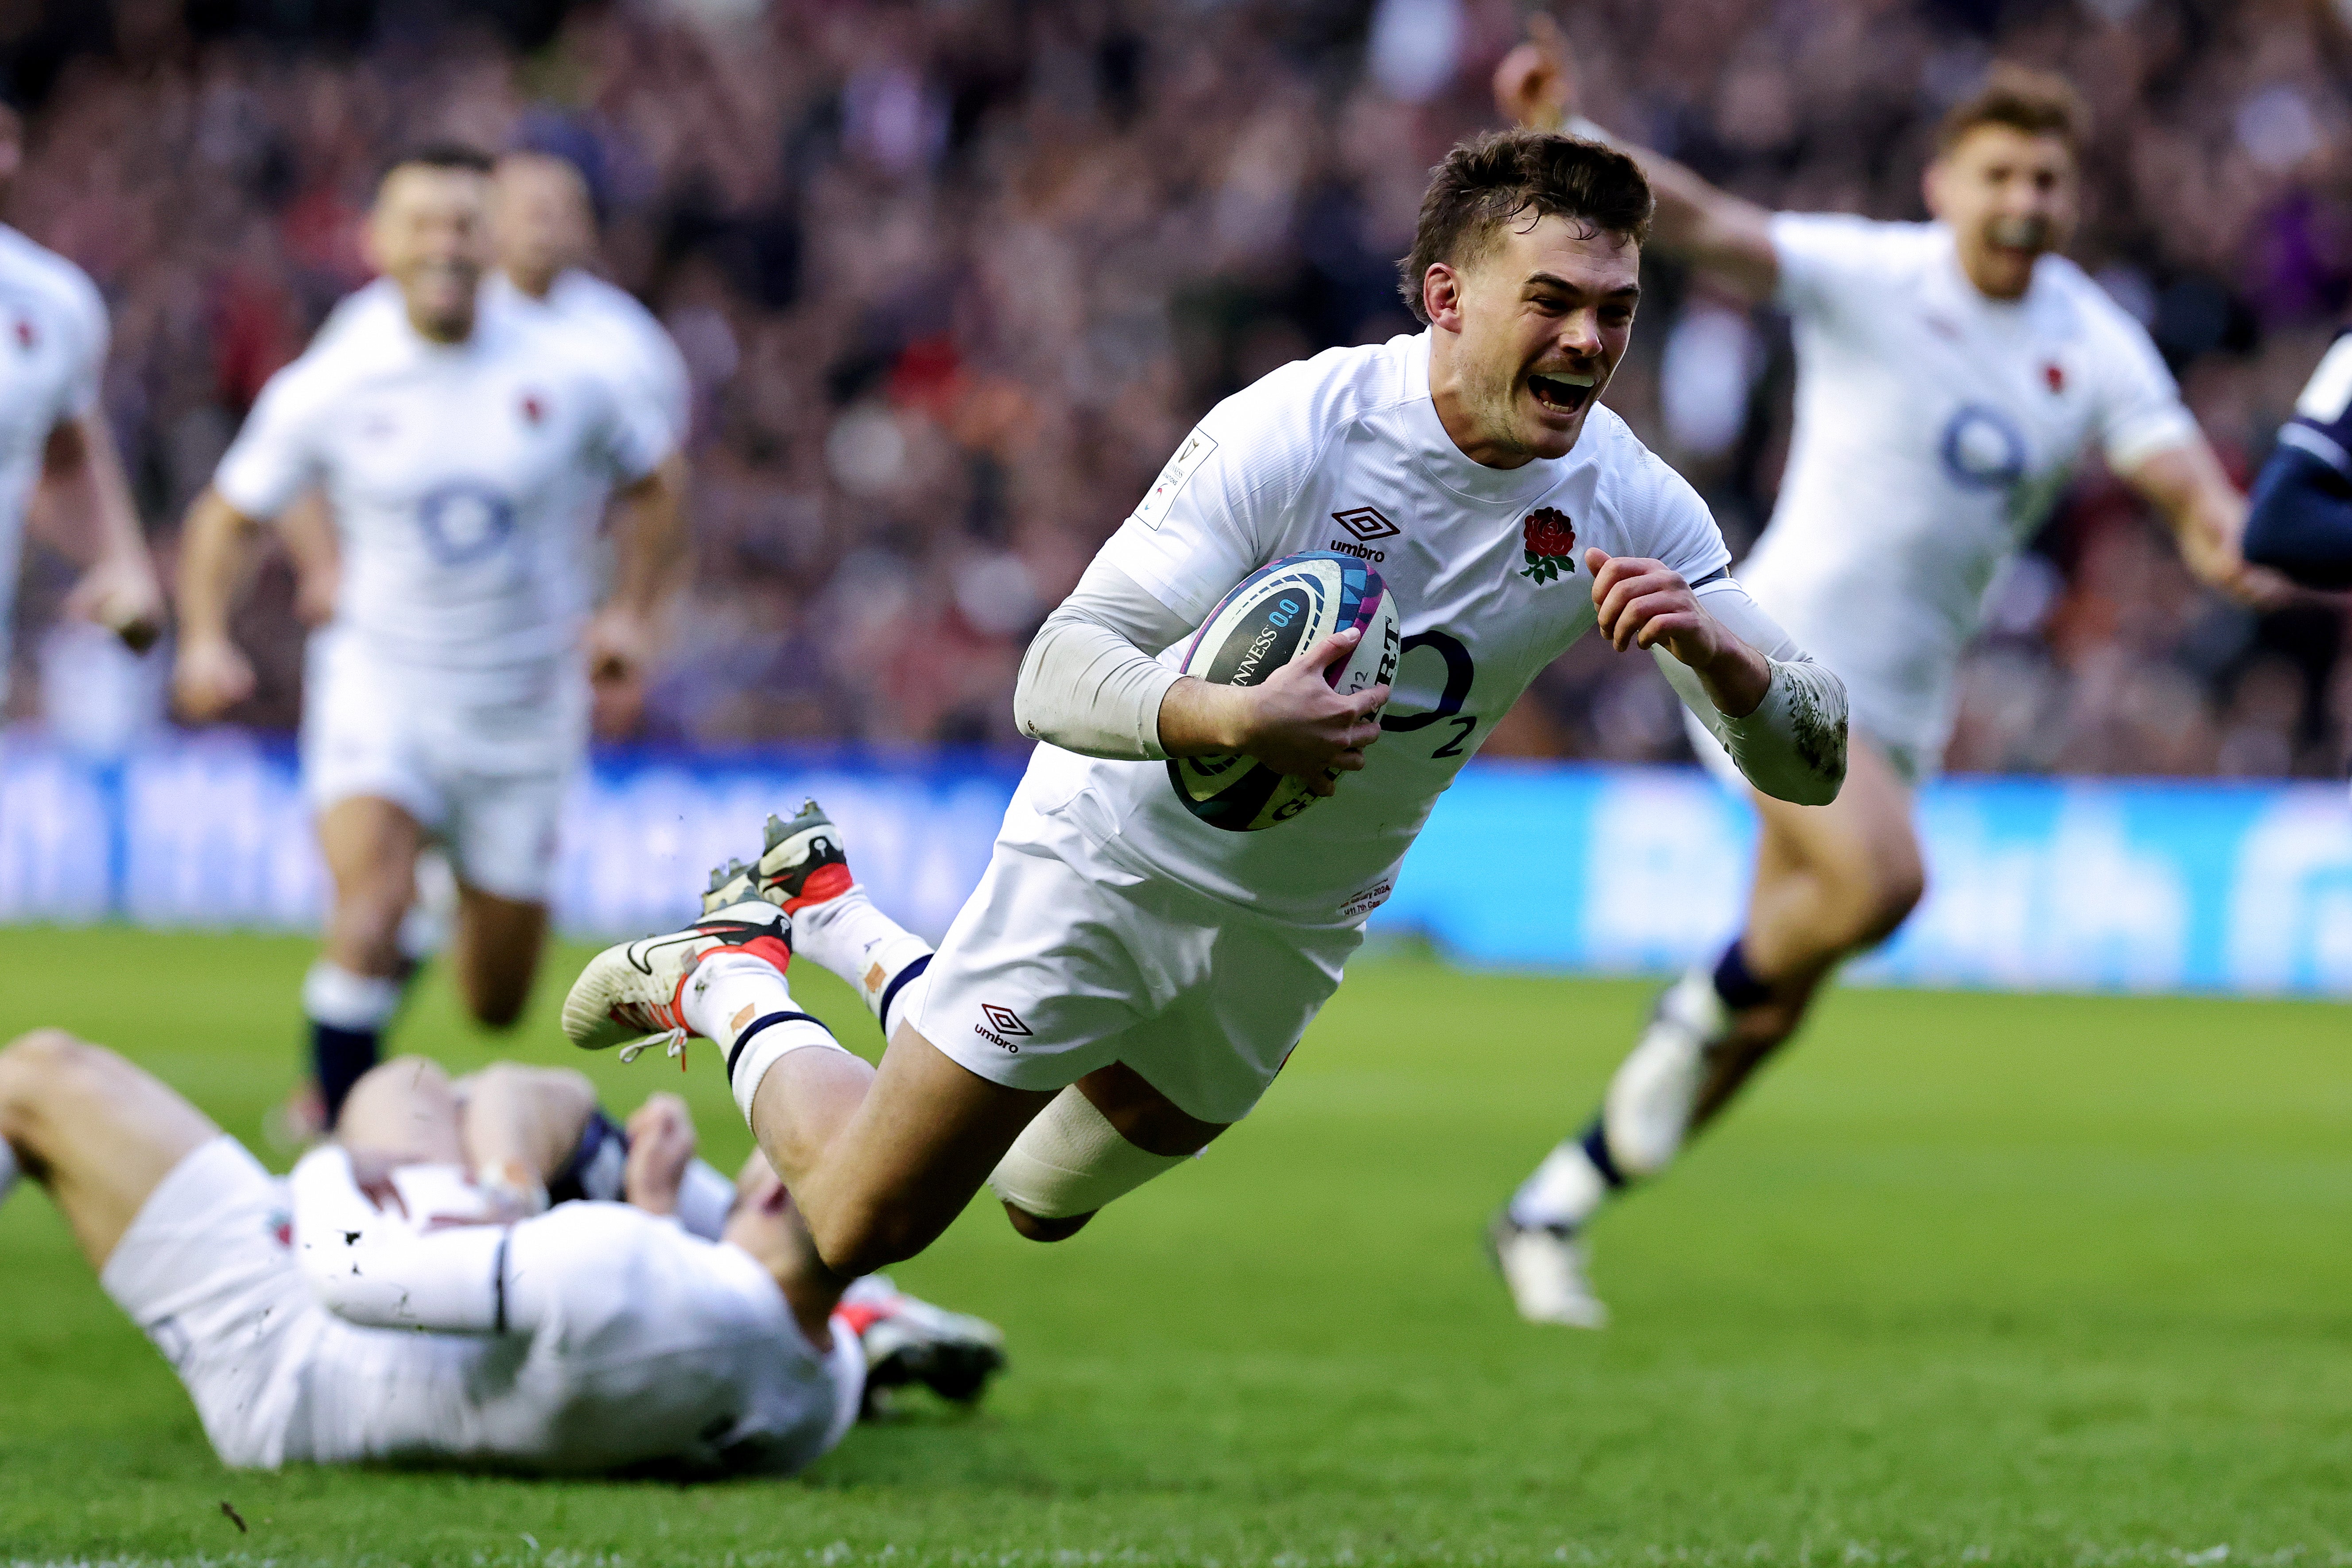 The continued backing of George Furbank indicates how England hope to evolve